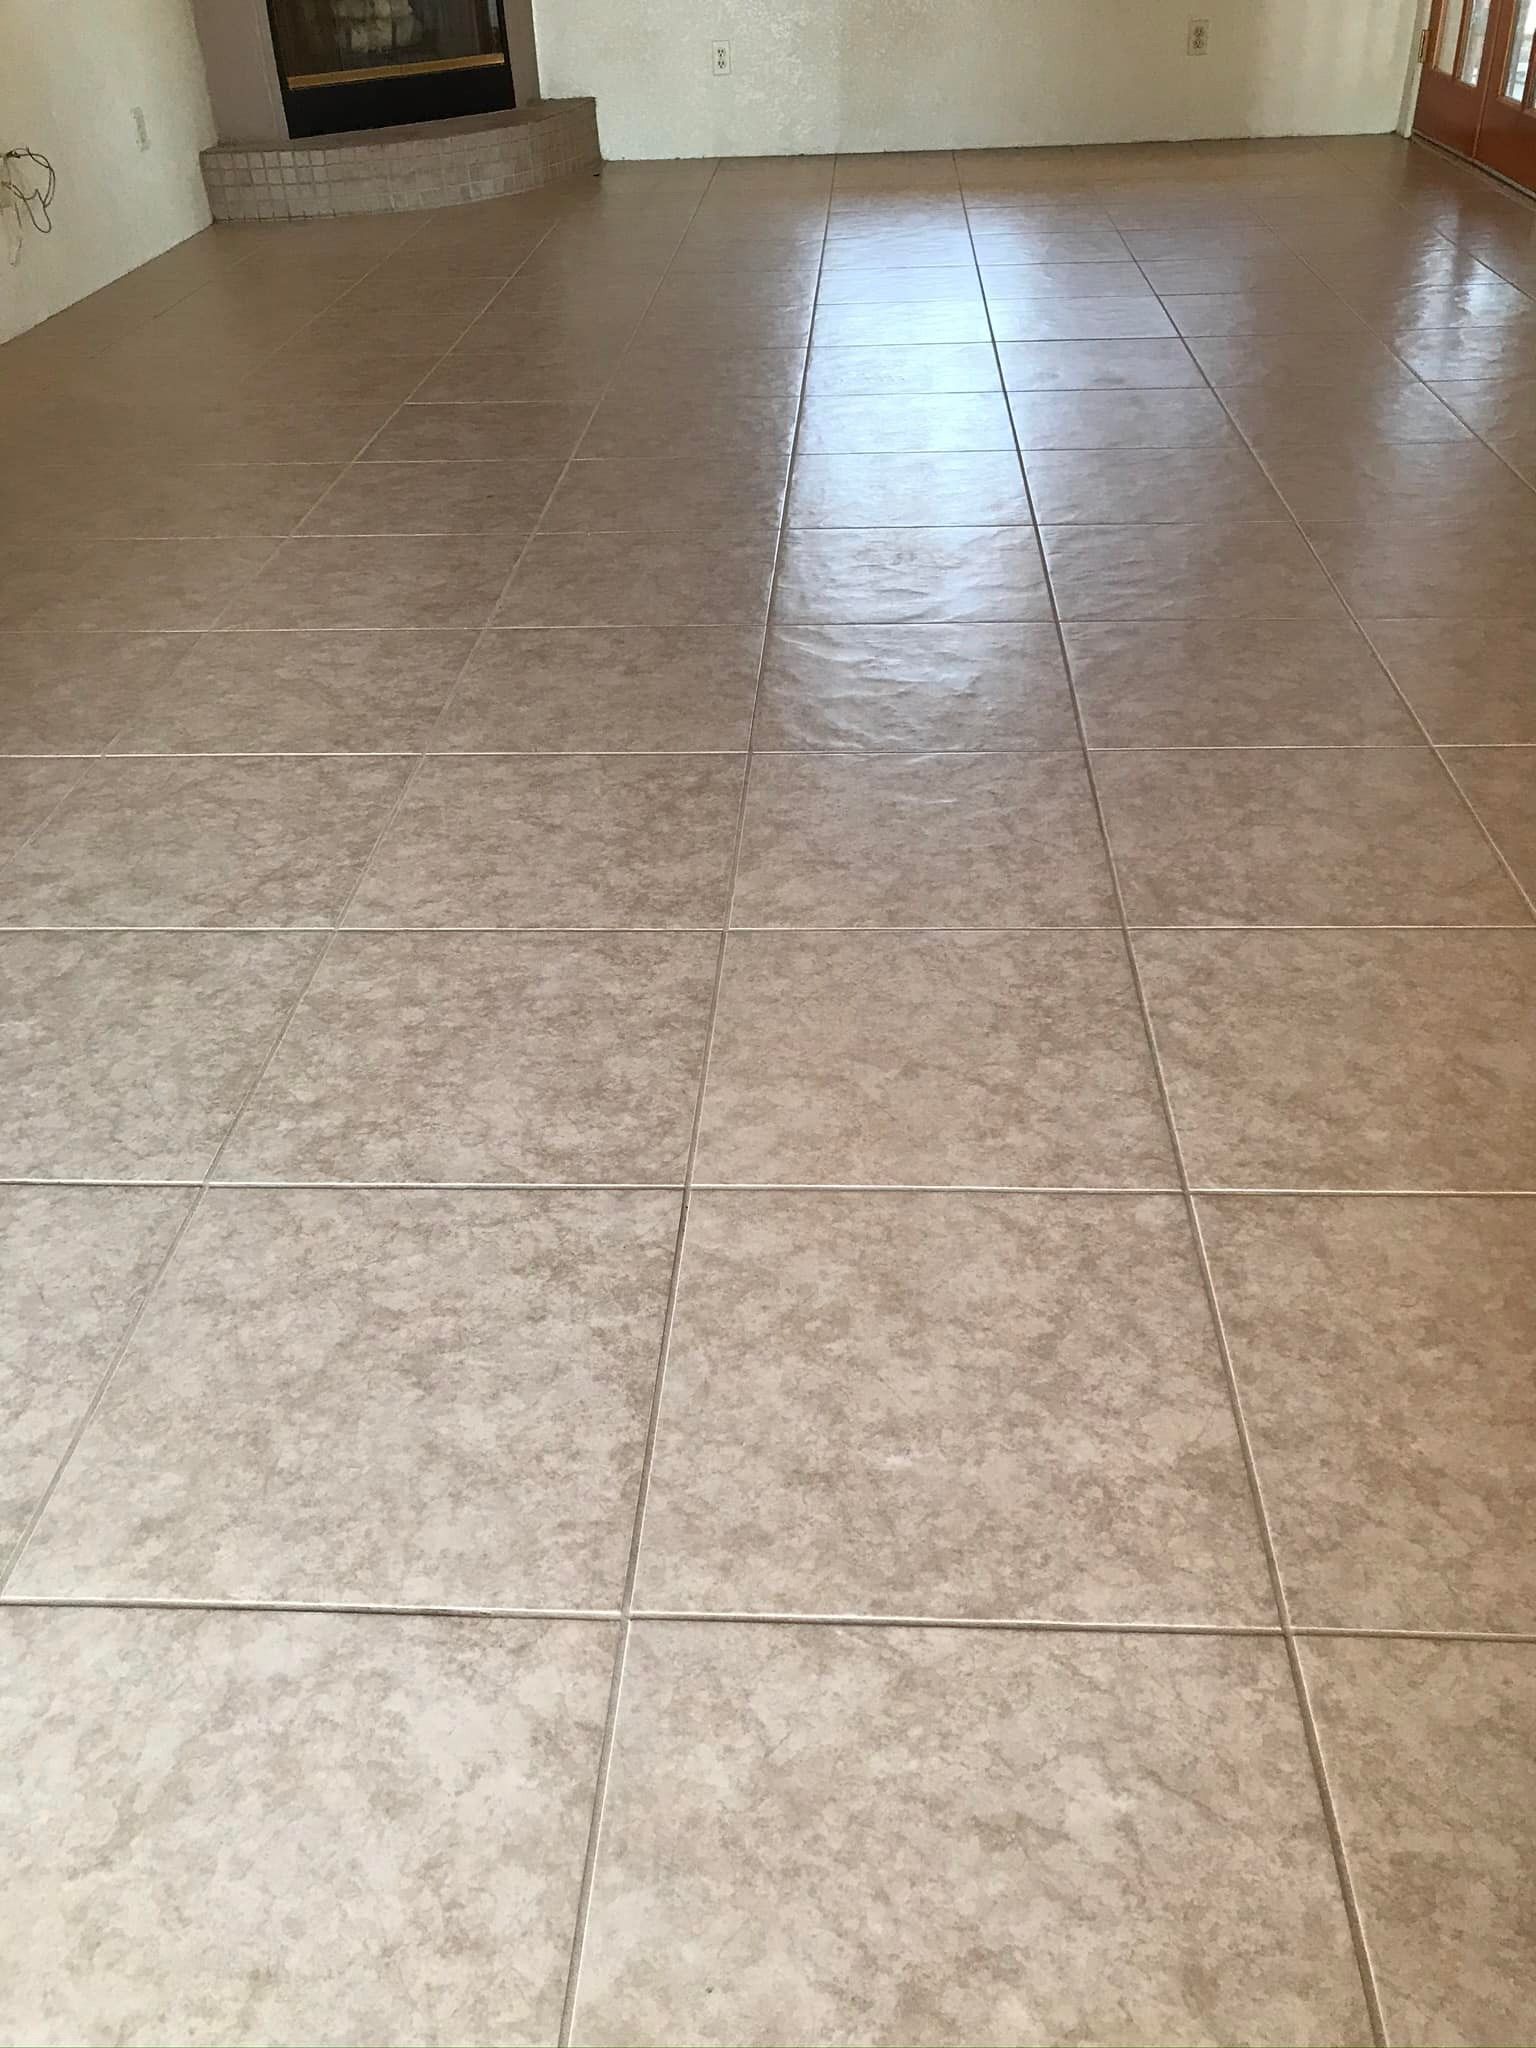 Tile and Grout Cleaning for Superstition Carpet and Tile Care LLC in Apache Junction, AZ